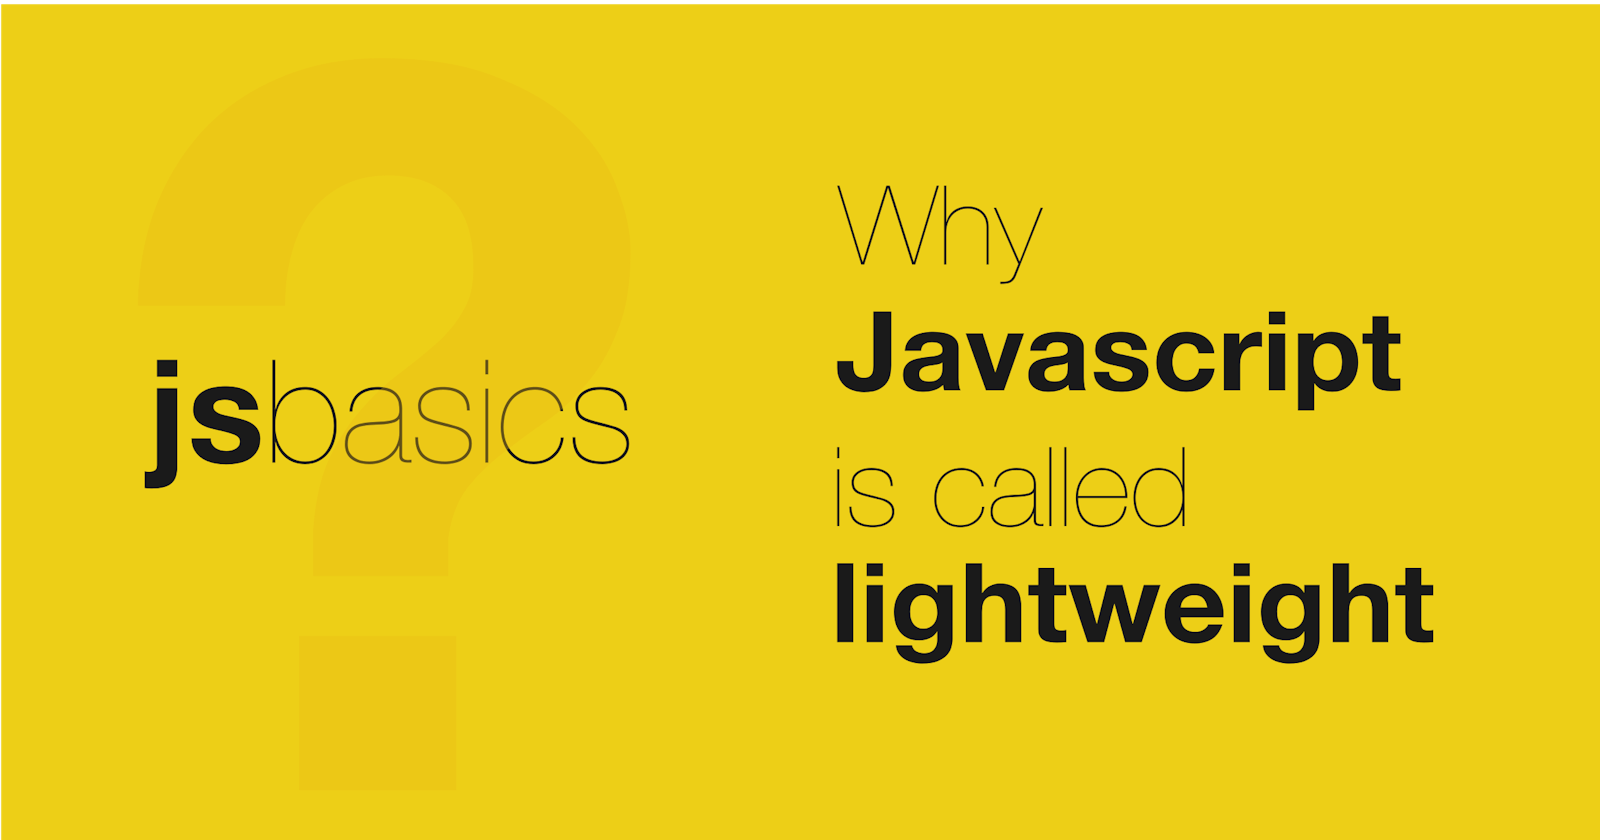 Why Javascript is called lightweight